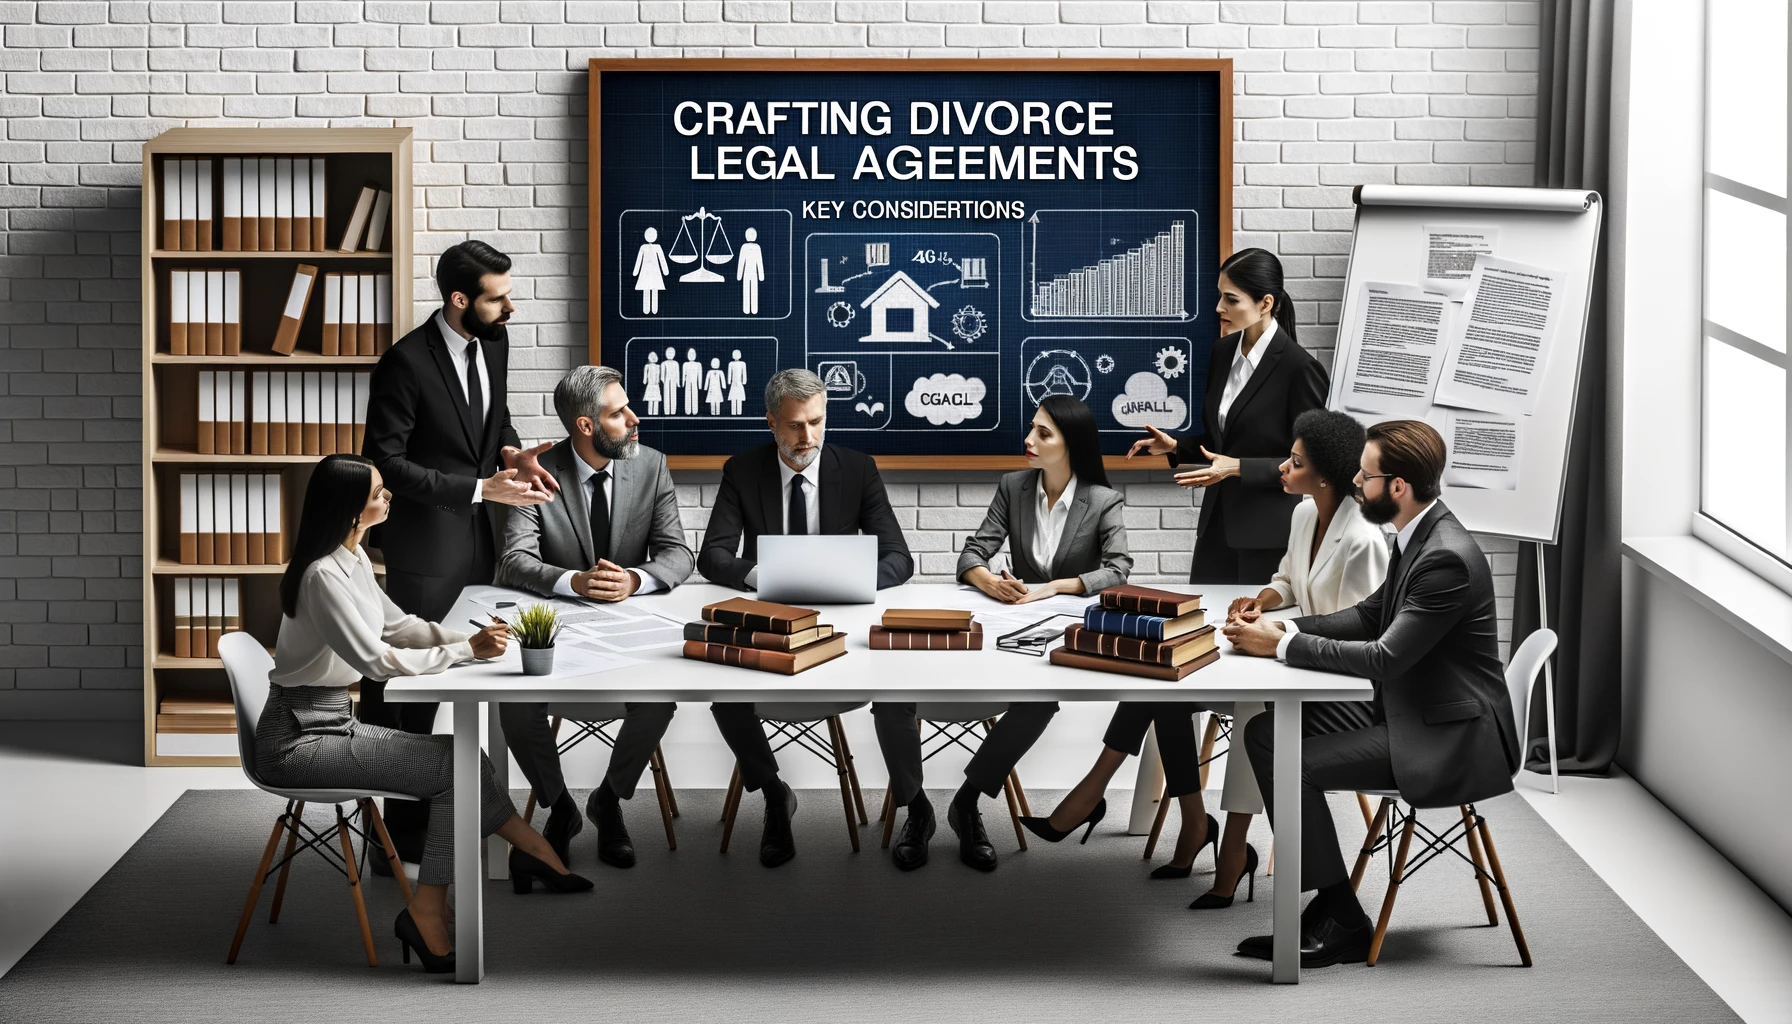 Crafting Divorce Legal Agreements: Key Considerations